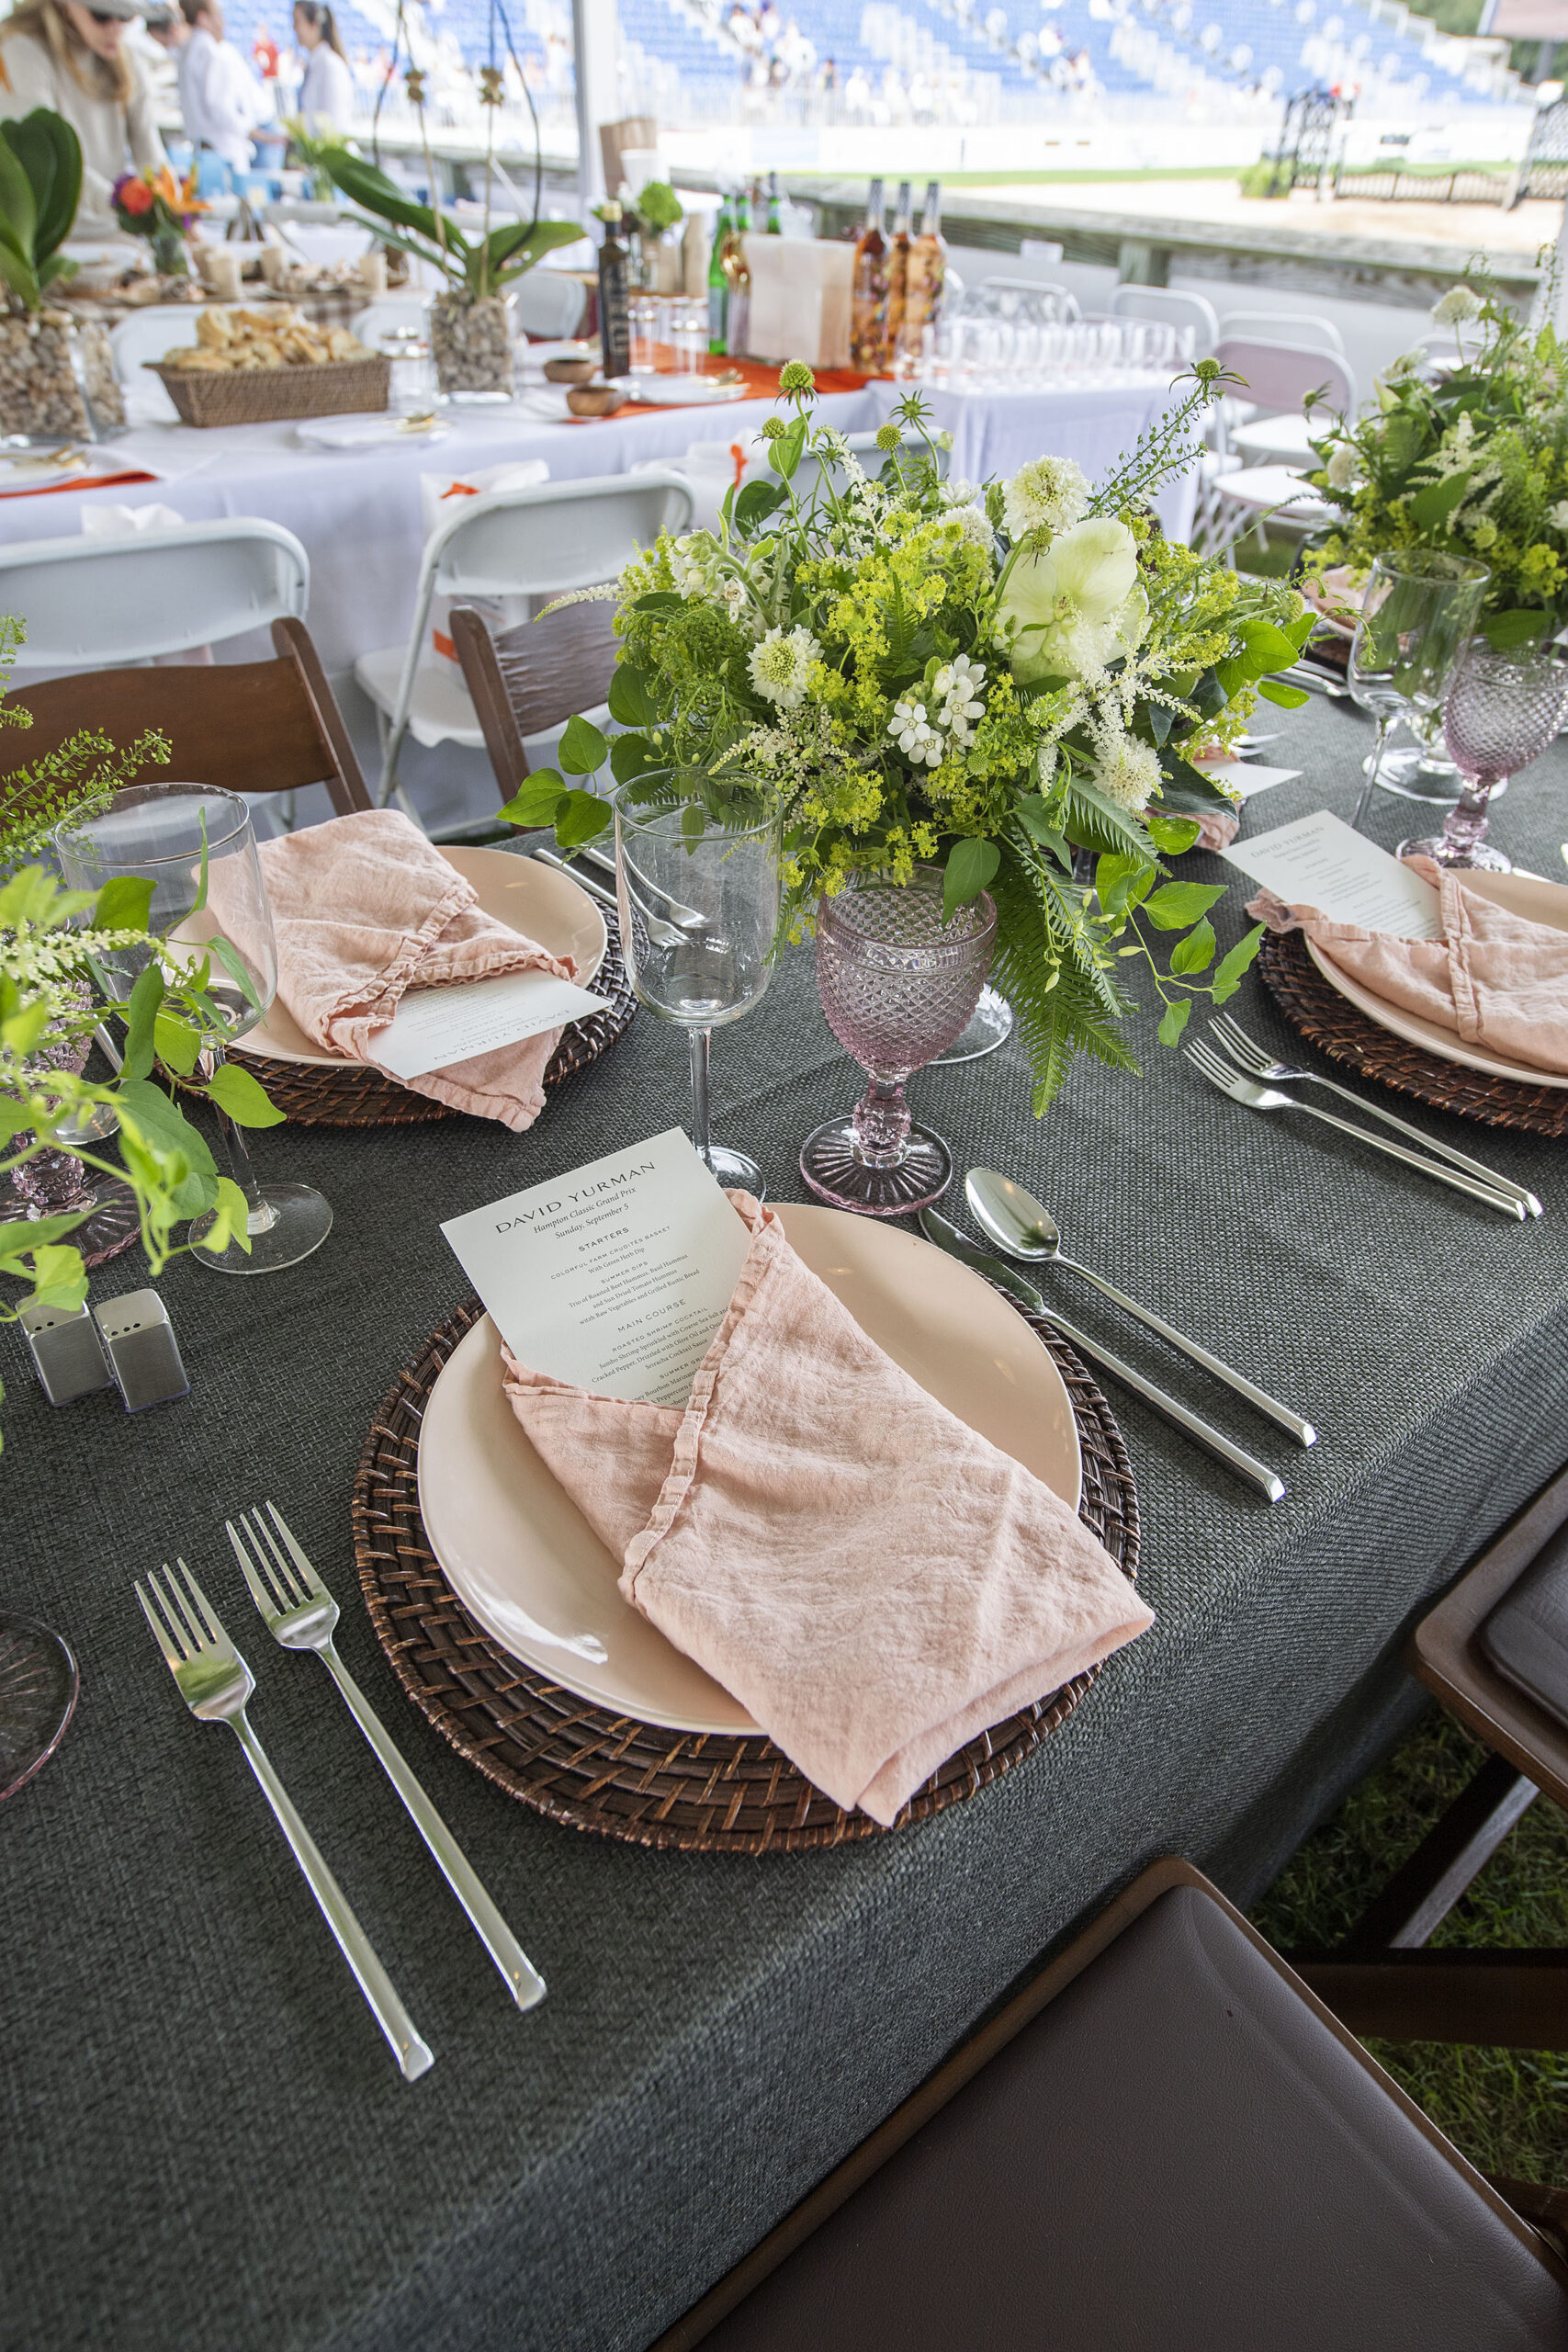 The table setting for David Yurman in the VIP tent at the 2021 Hampton Classic on Grand Prix Sunday, September 5th, 2021